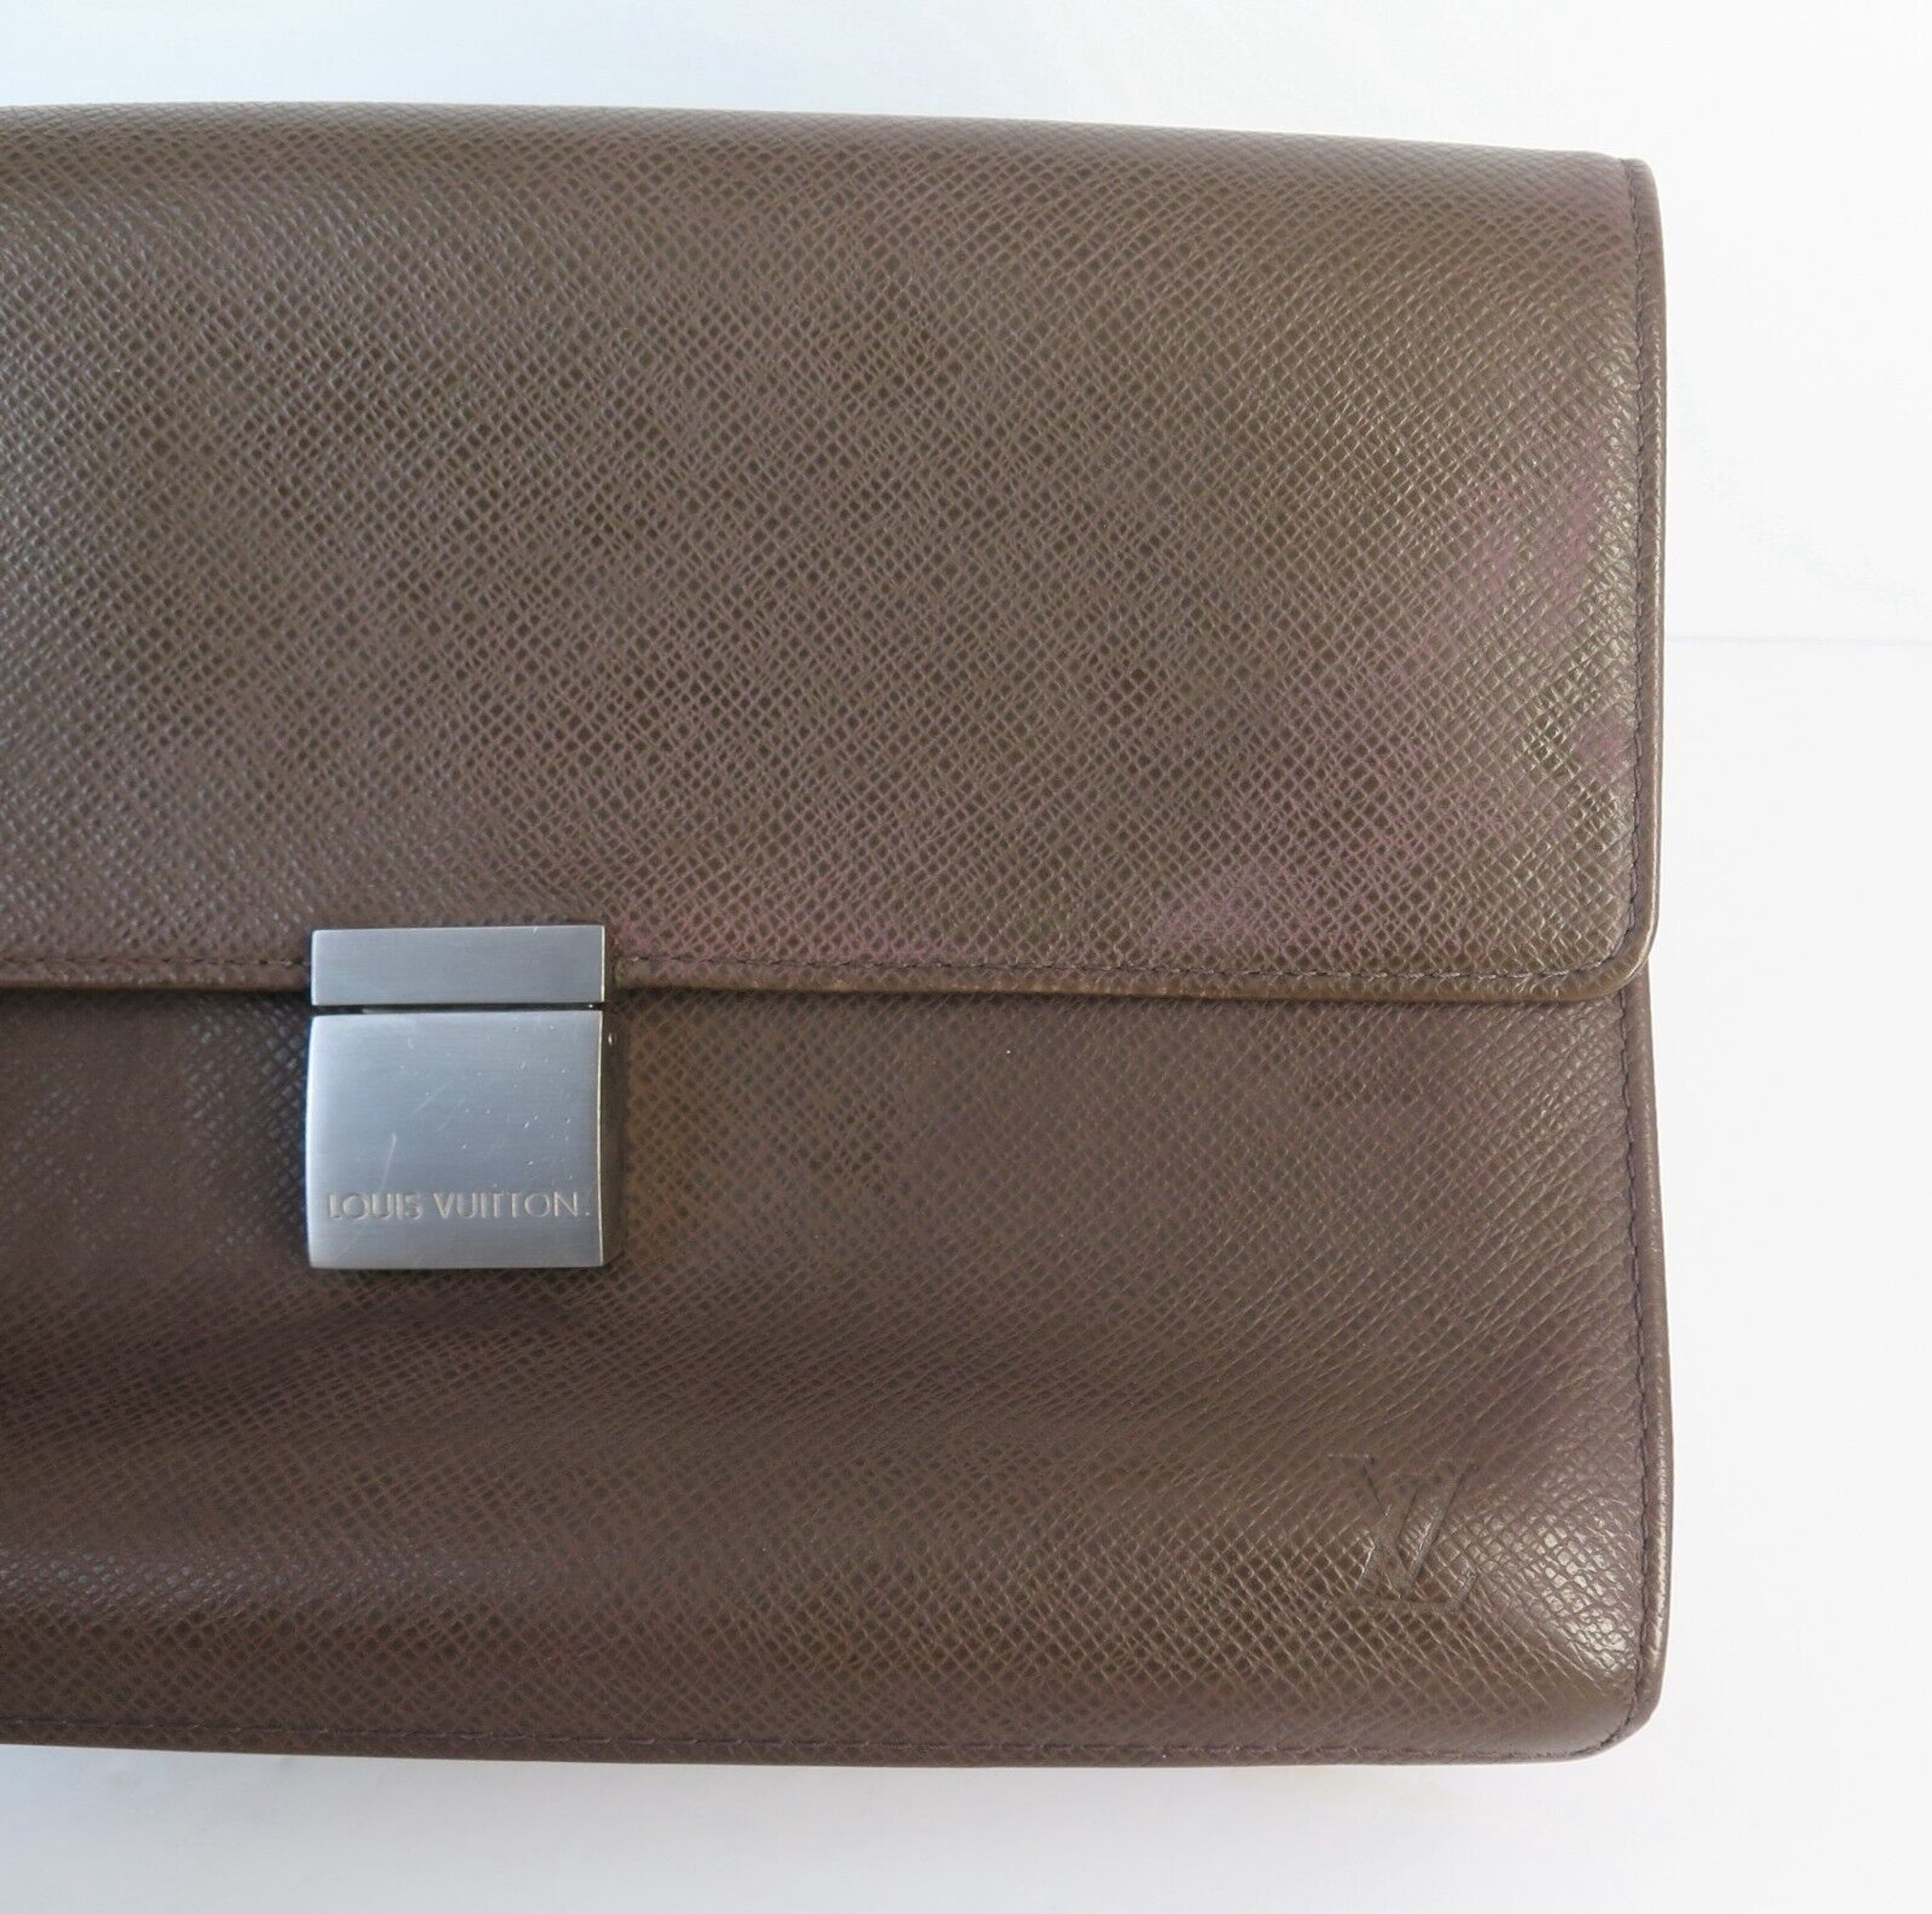 2004 Louis Vuitton Mens Selenga Clutch Bag in Grizzly Brown Taiga Leather -  Harrington & Co.